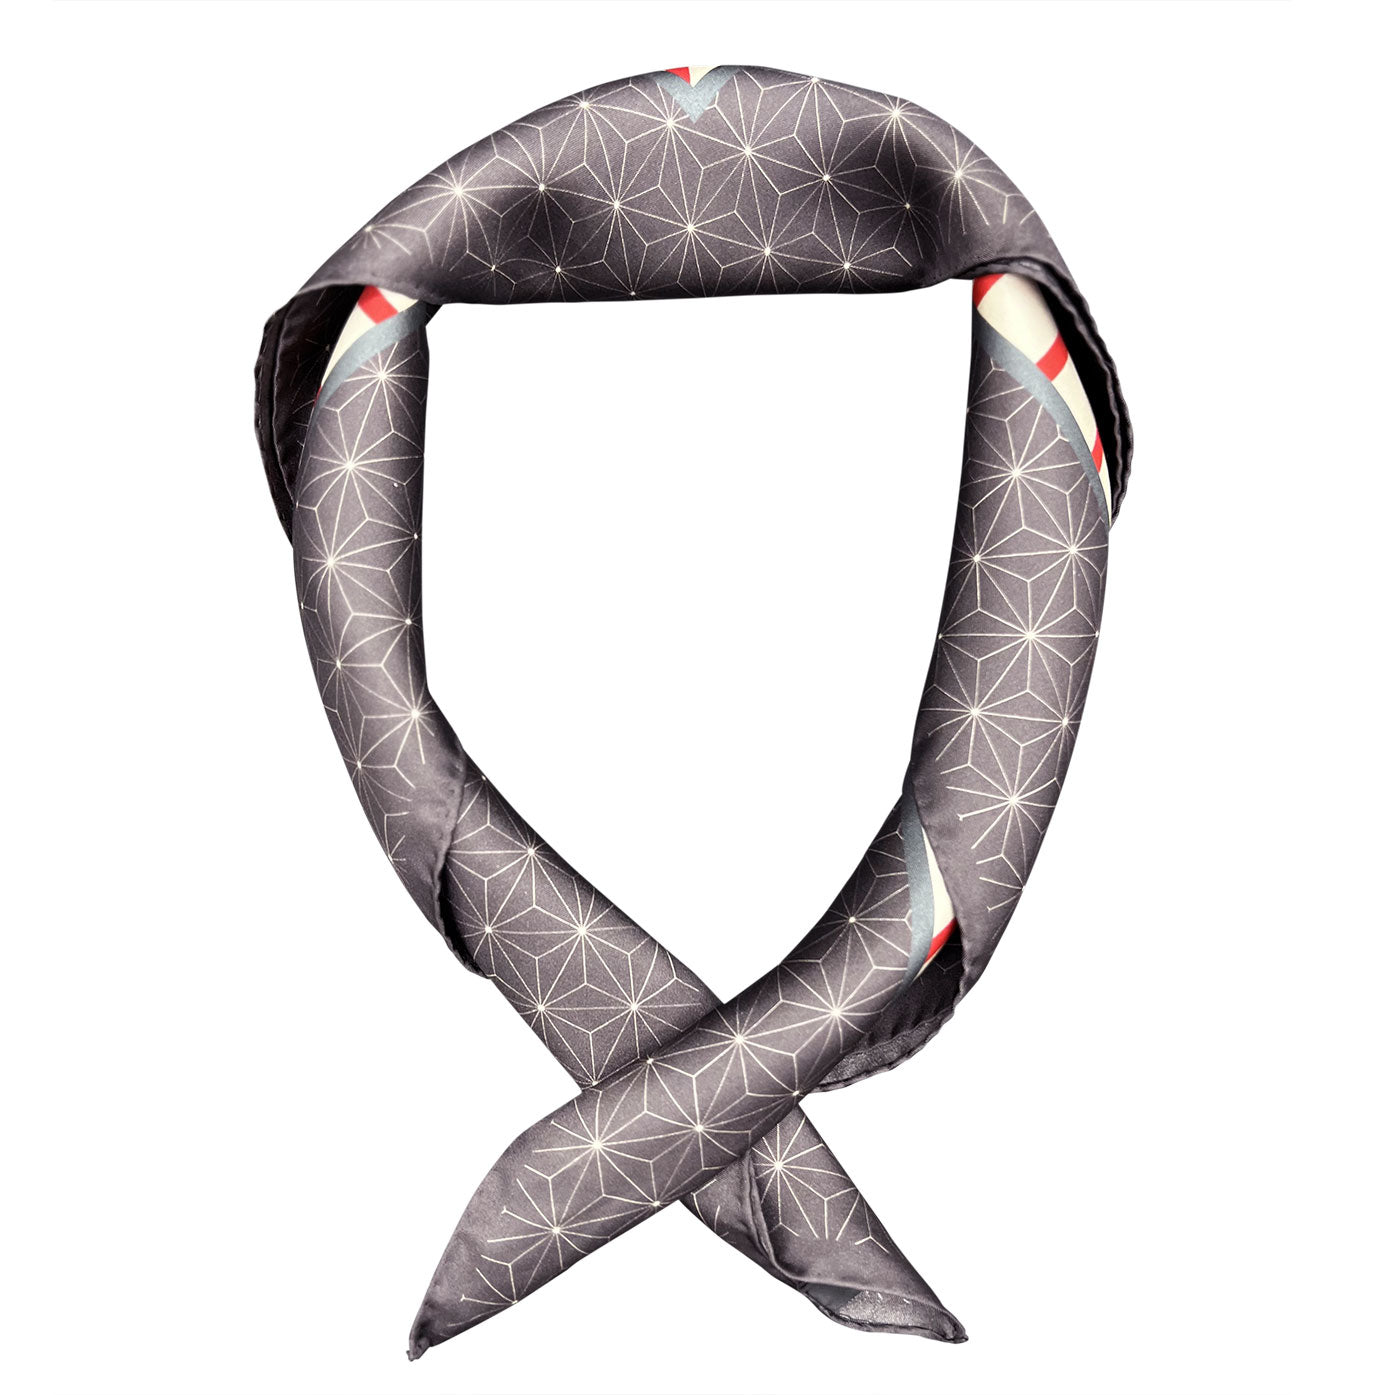 'The Sun' neckerchief twisted and curled into a loop on a white background.